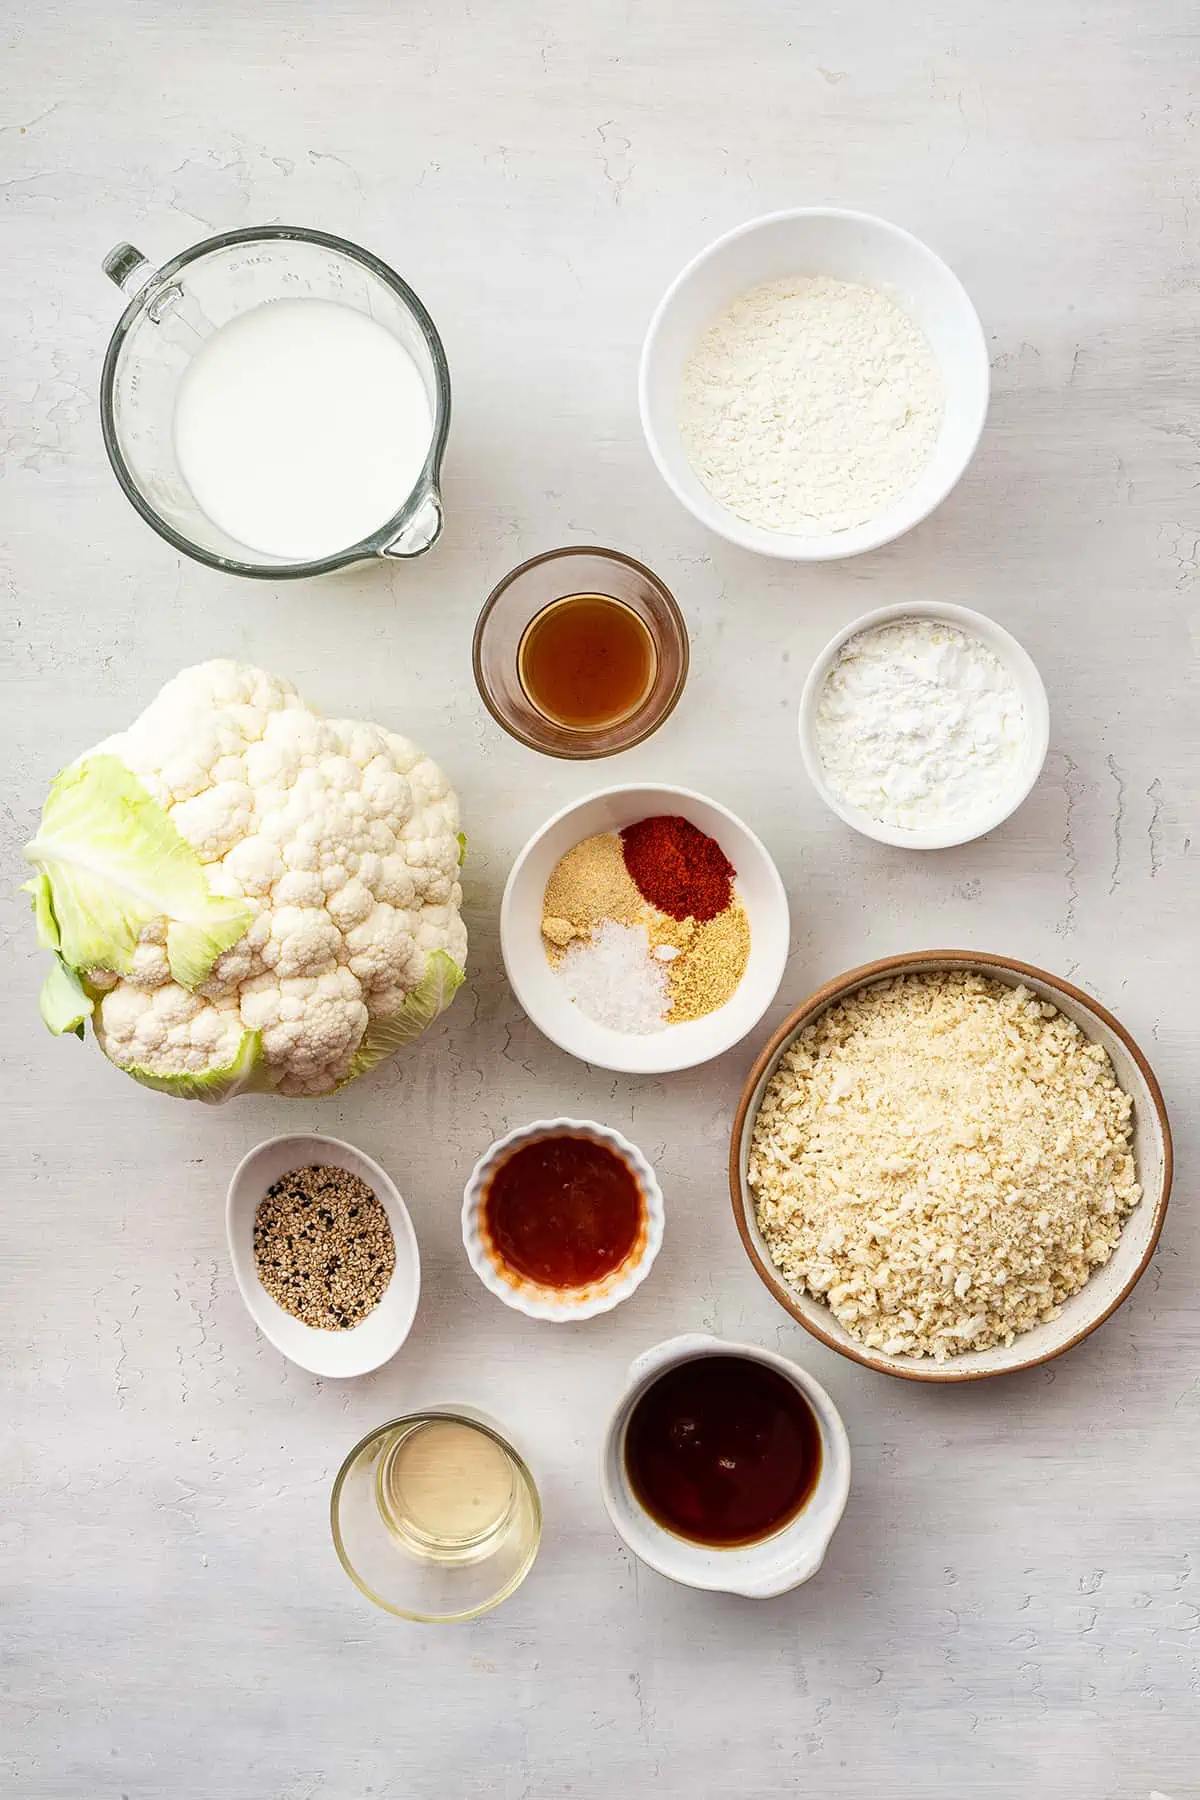 Overhead view of the ingredients for bang bang cauliflower: a head of cauliflower, a pyrex of almond milk, a bowl of seasonings, a bowl of panko bread crumbs, a bowl of chili garlic sauce, a bowl of gluten-free flour, a bowl of sesame seeds, a bowl of rice vinegar, a bowl of apple cider vinegar, a bowl of maple syrup, and a bowl of starch.